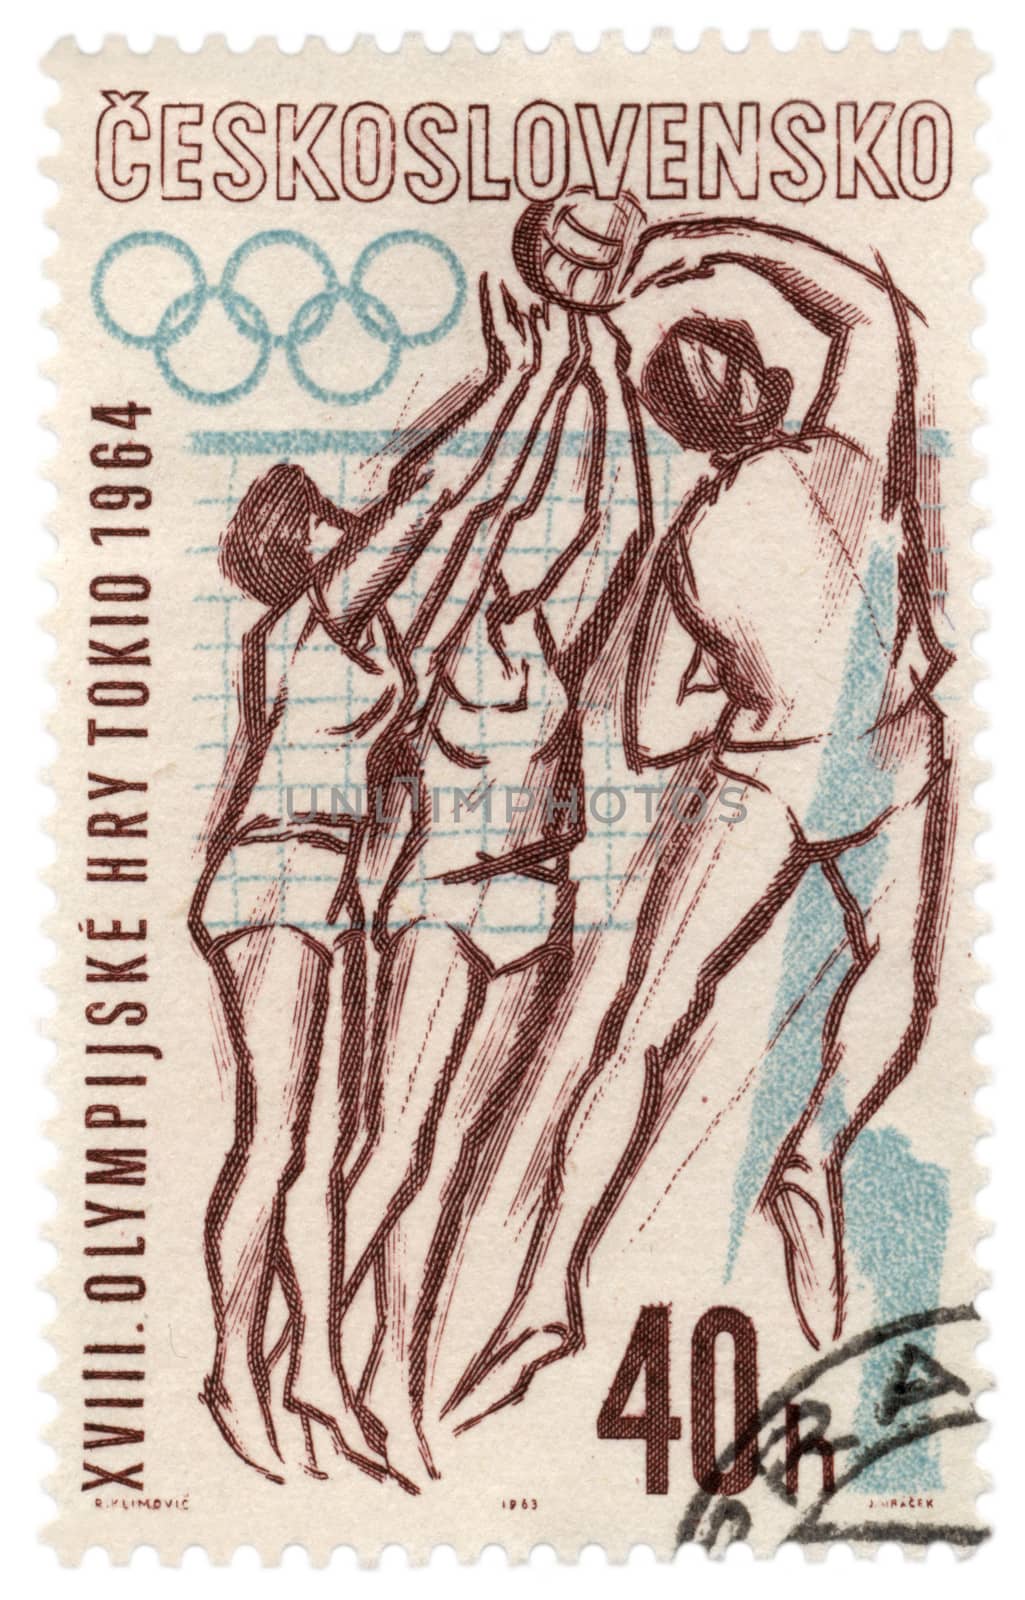 Volleyball silhouettes on post stamp by wander